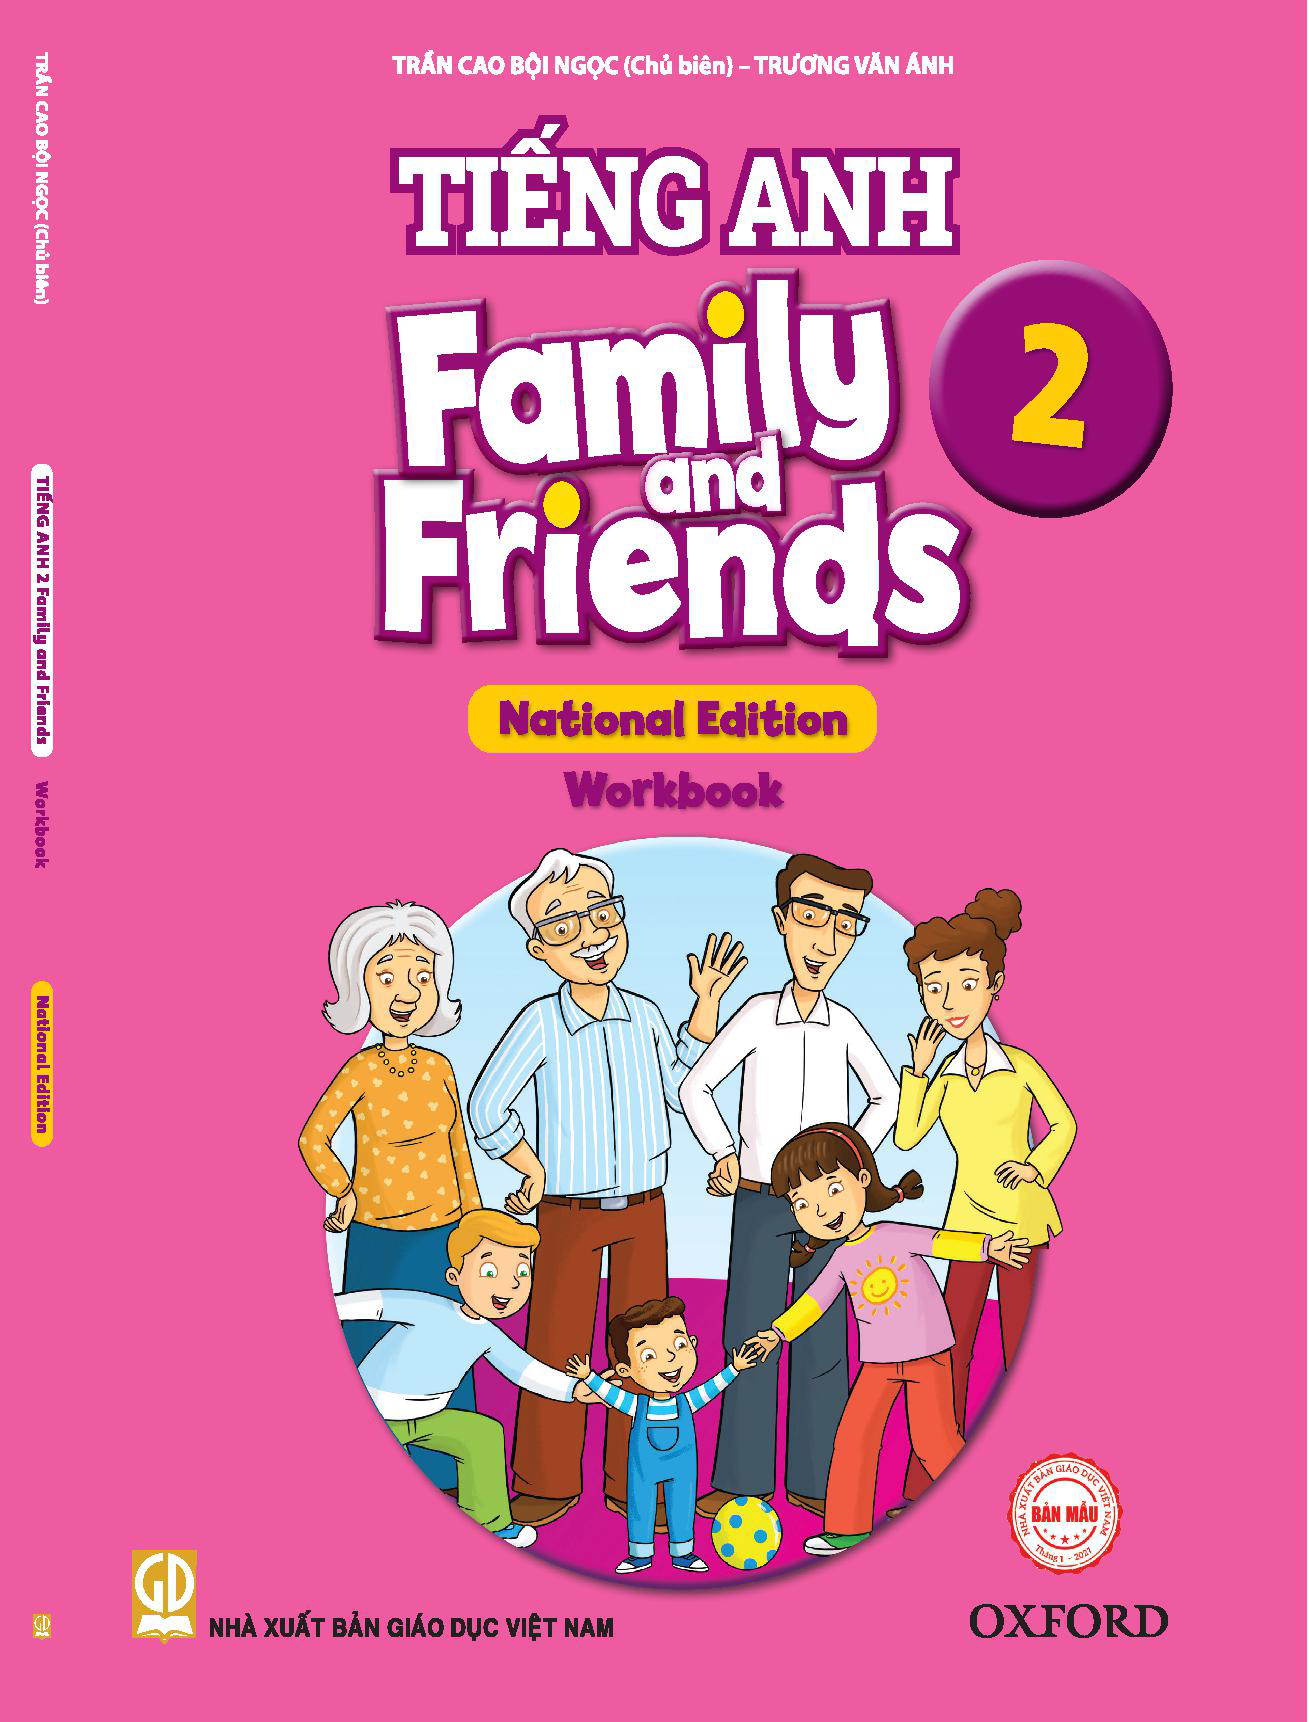 sach-bai-tap-tieng-anh-2-family-and-friends-1014